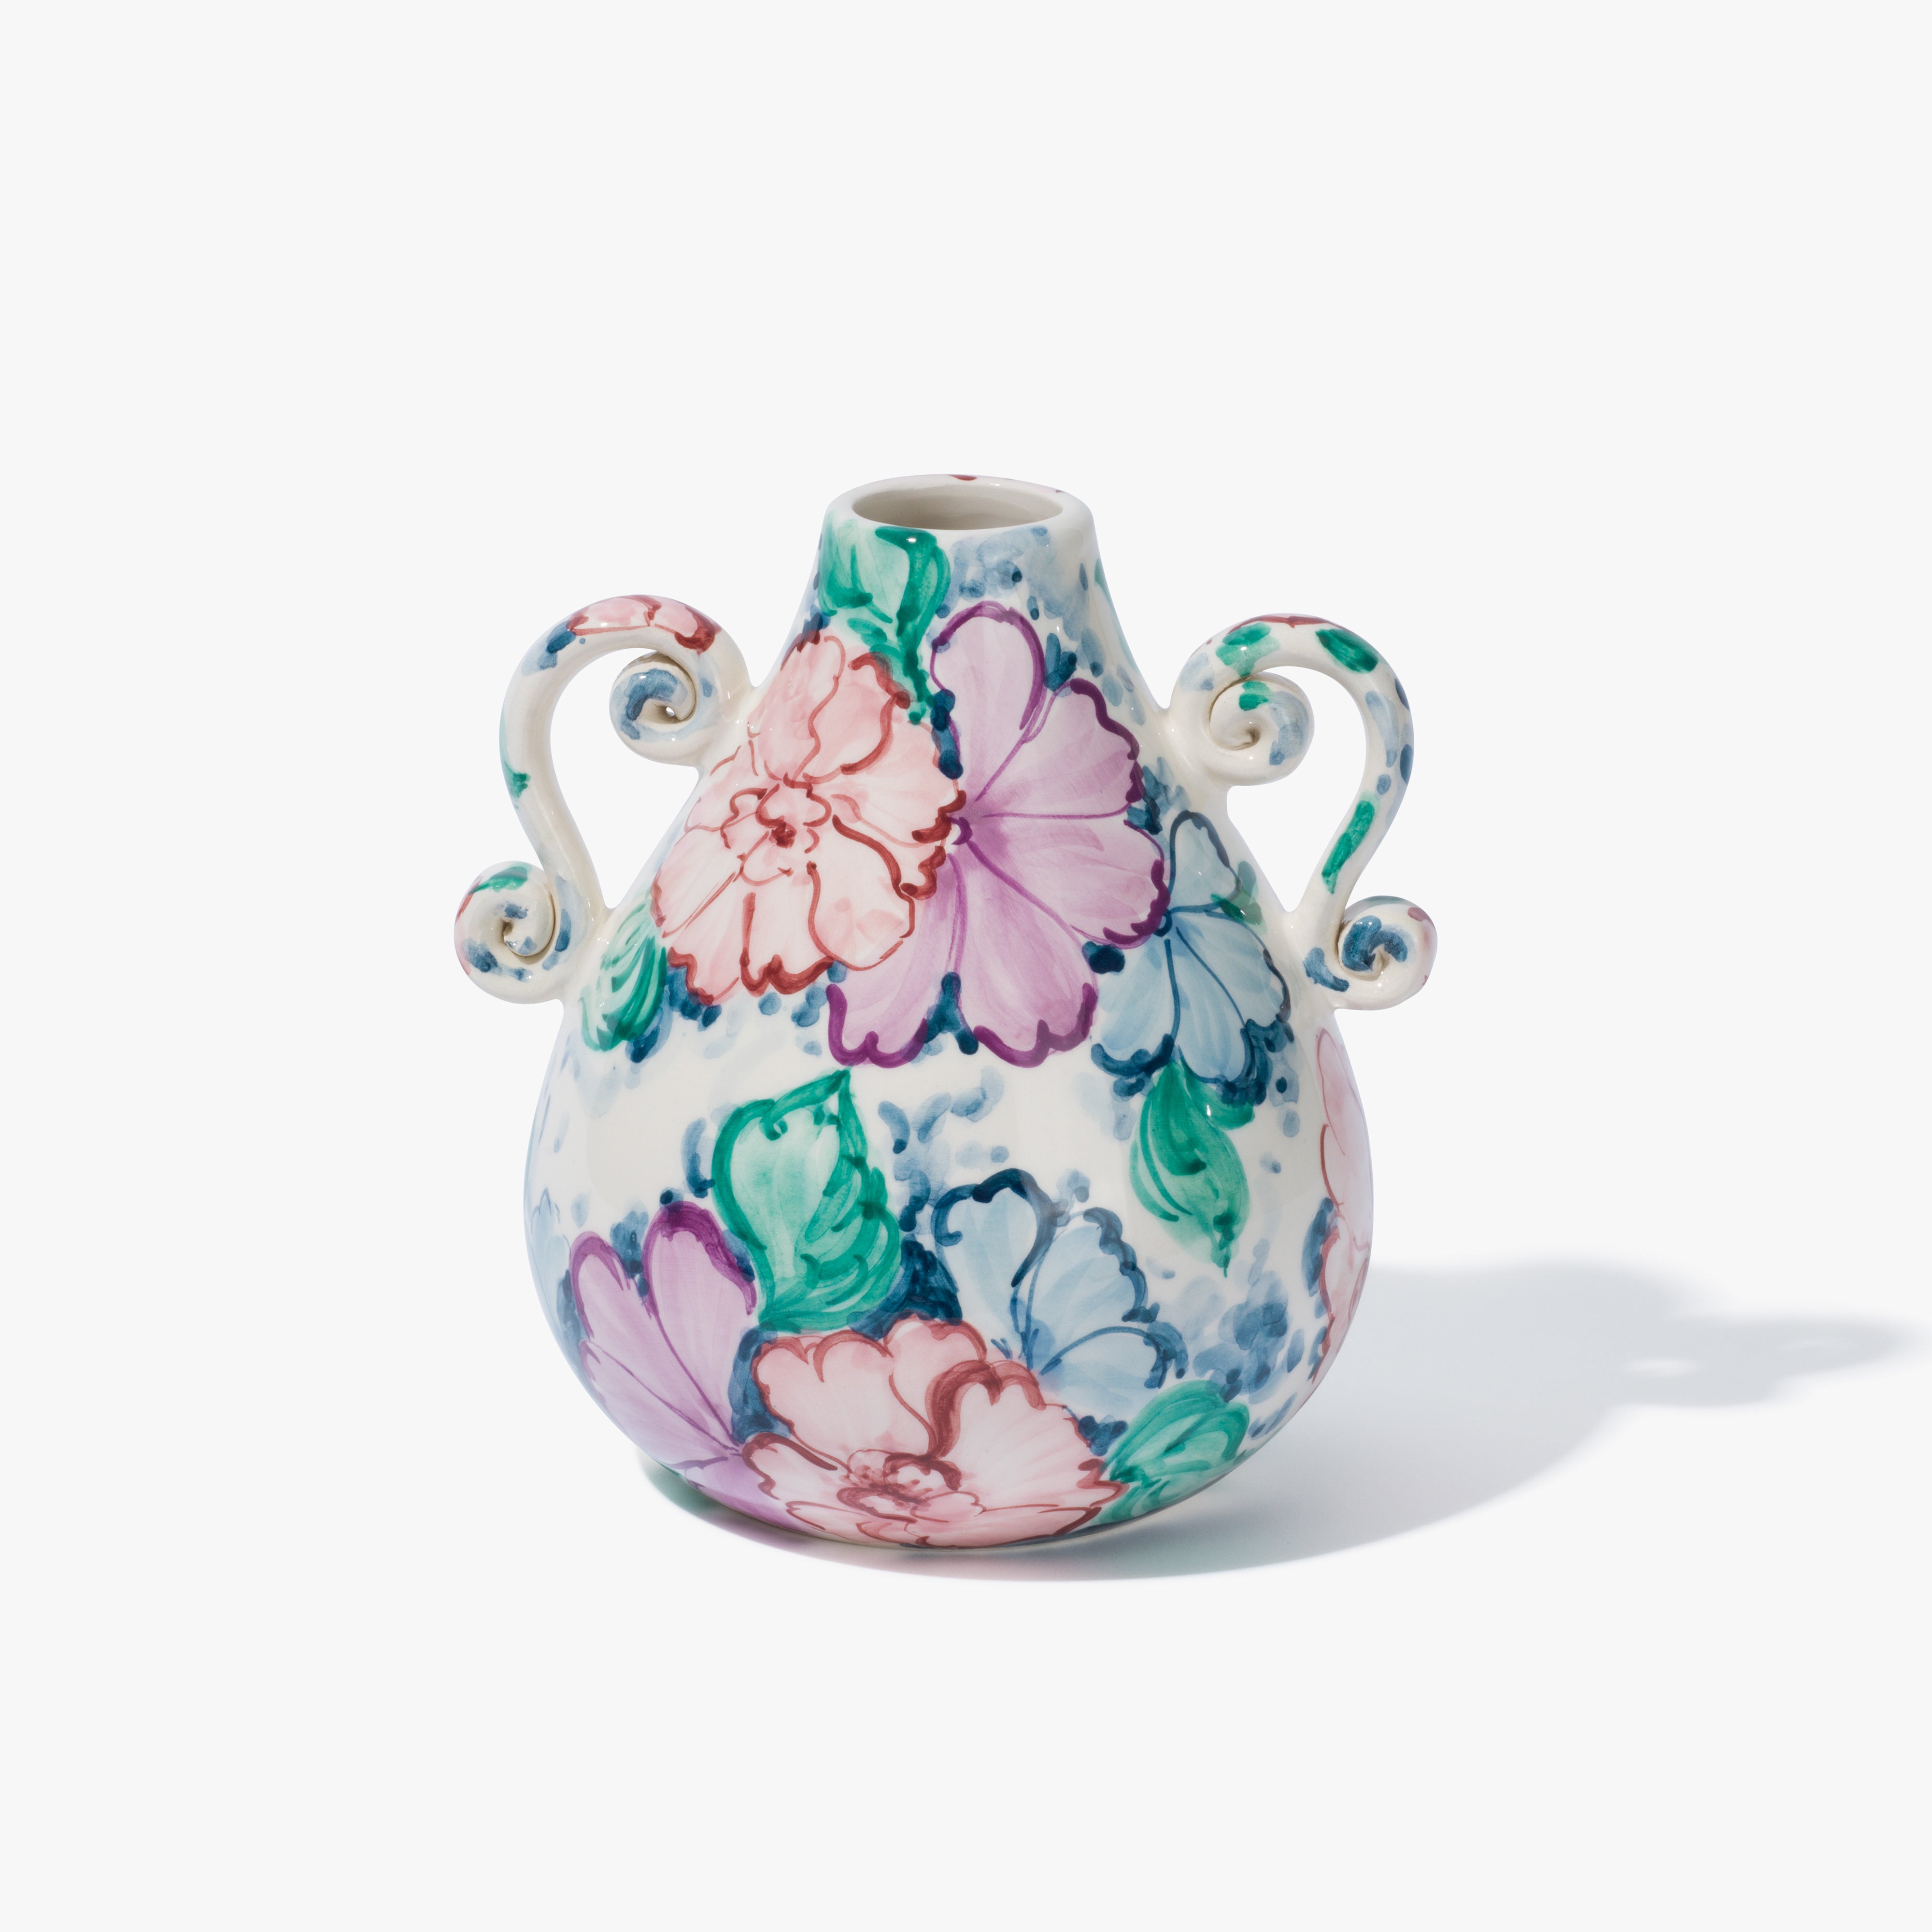 A handpainted floral vase in a beautifully sculptured shape with two handles. The pattern is a combination of blue, green, pink and purple. 